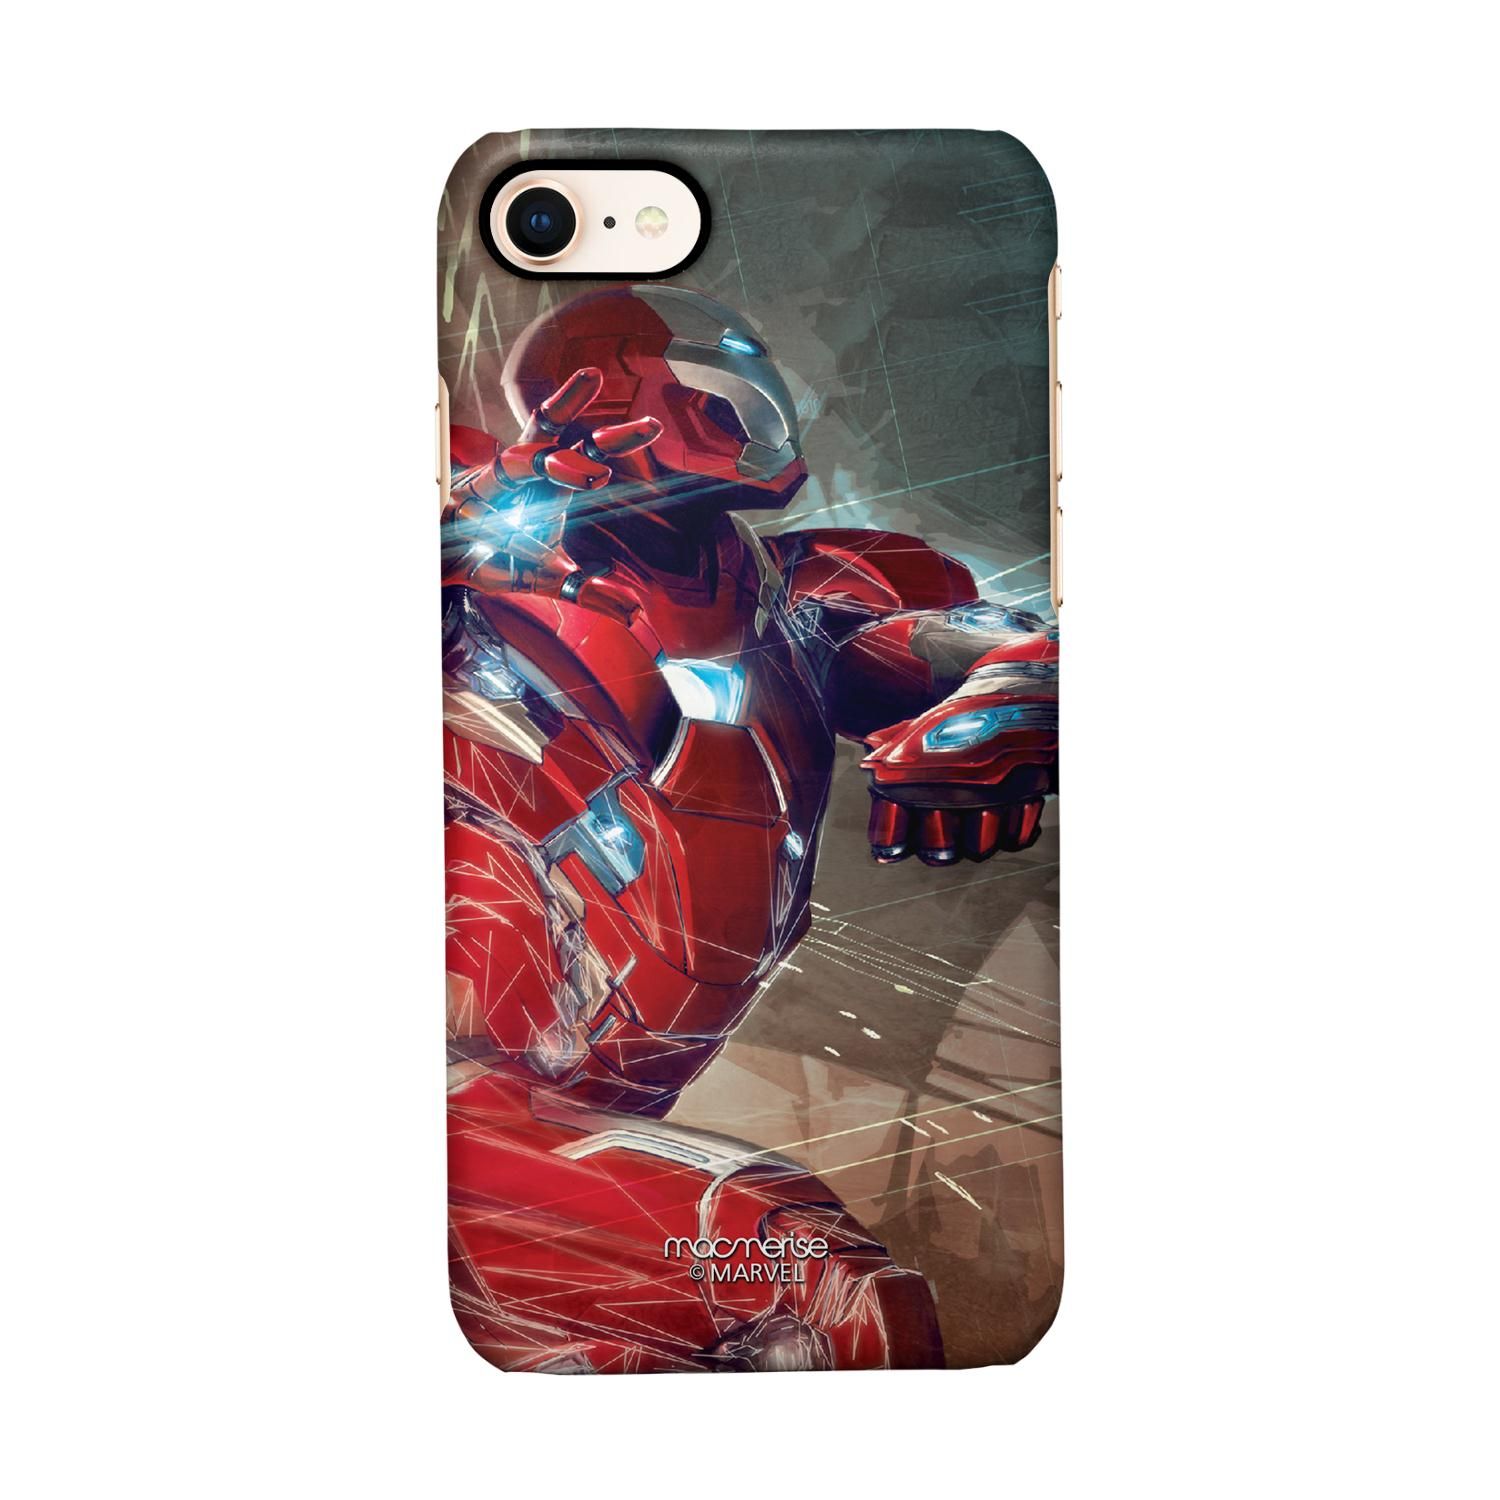 Buy Ironman Attack - Sleek Phone Case for iPhone 8 Online